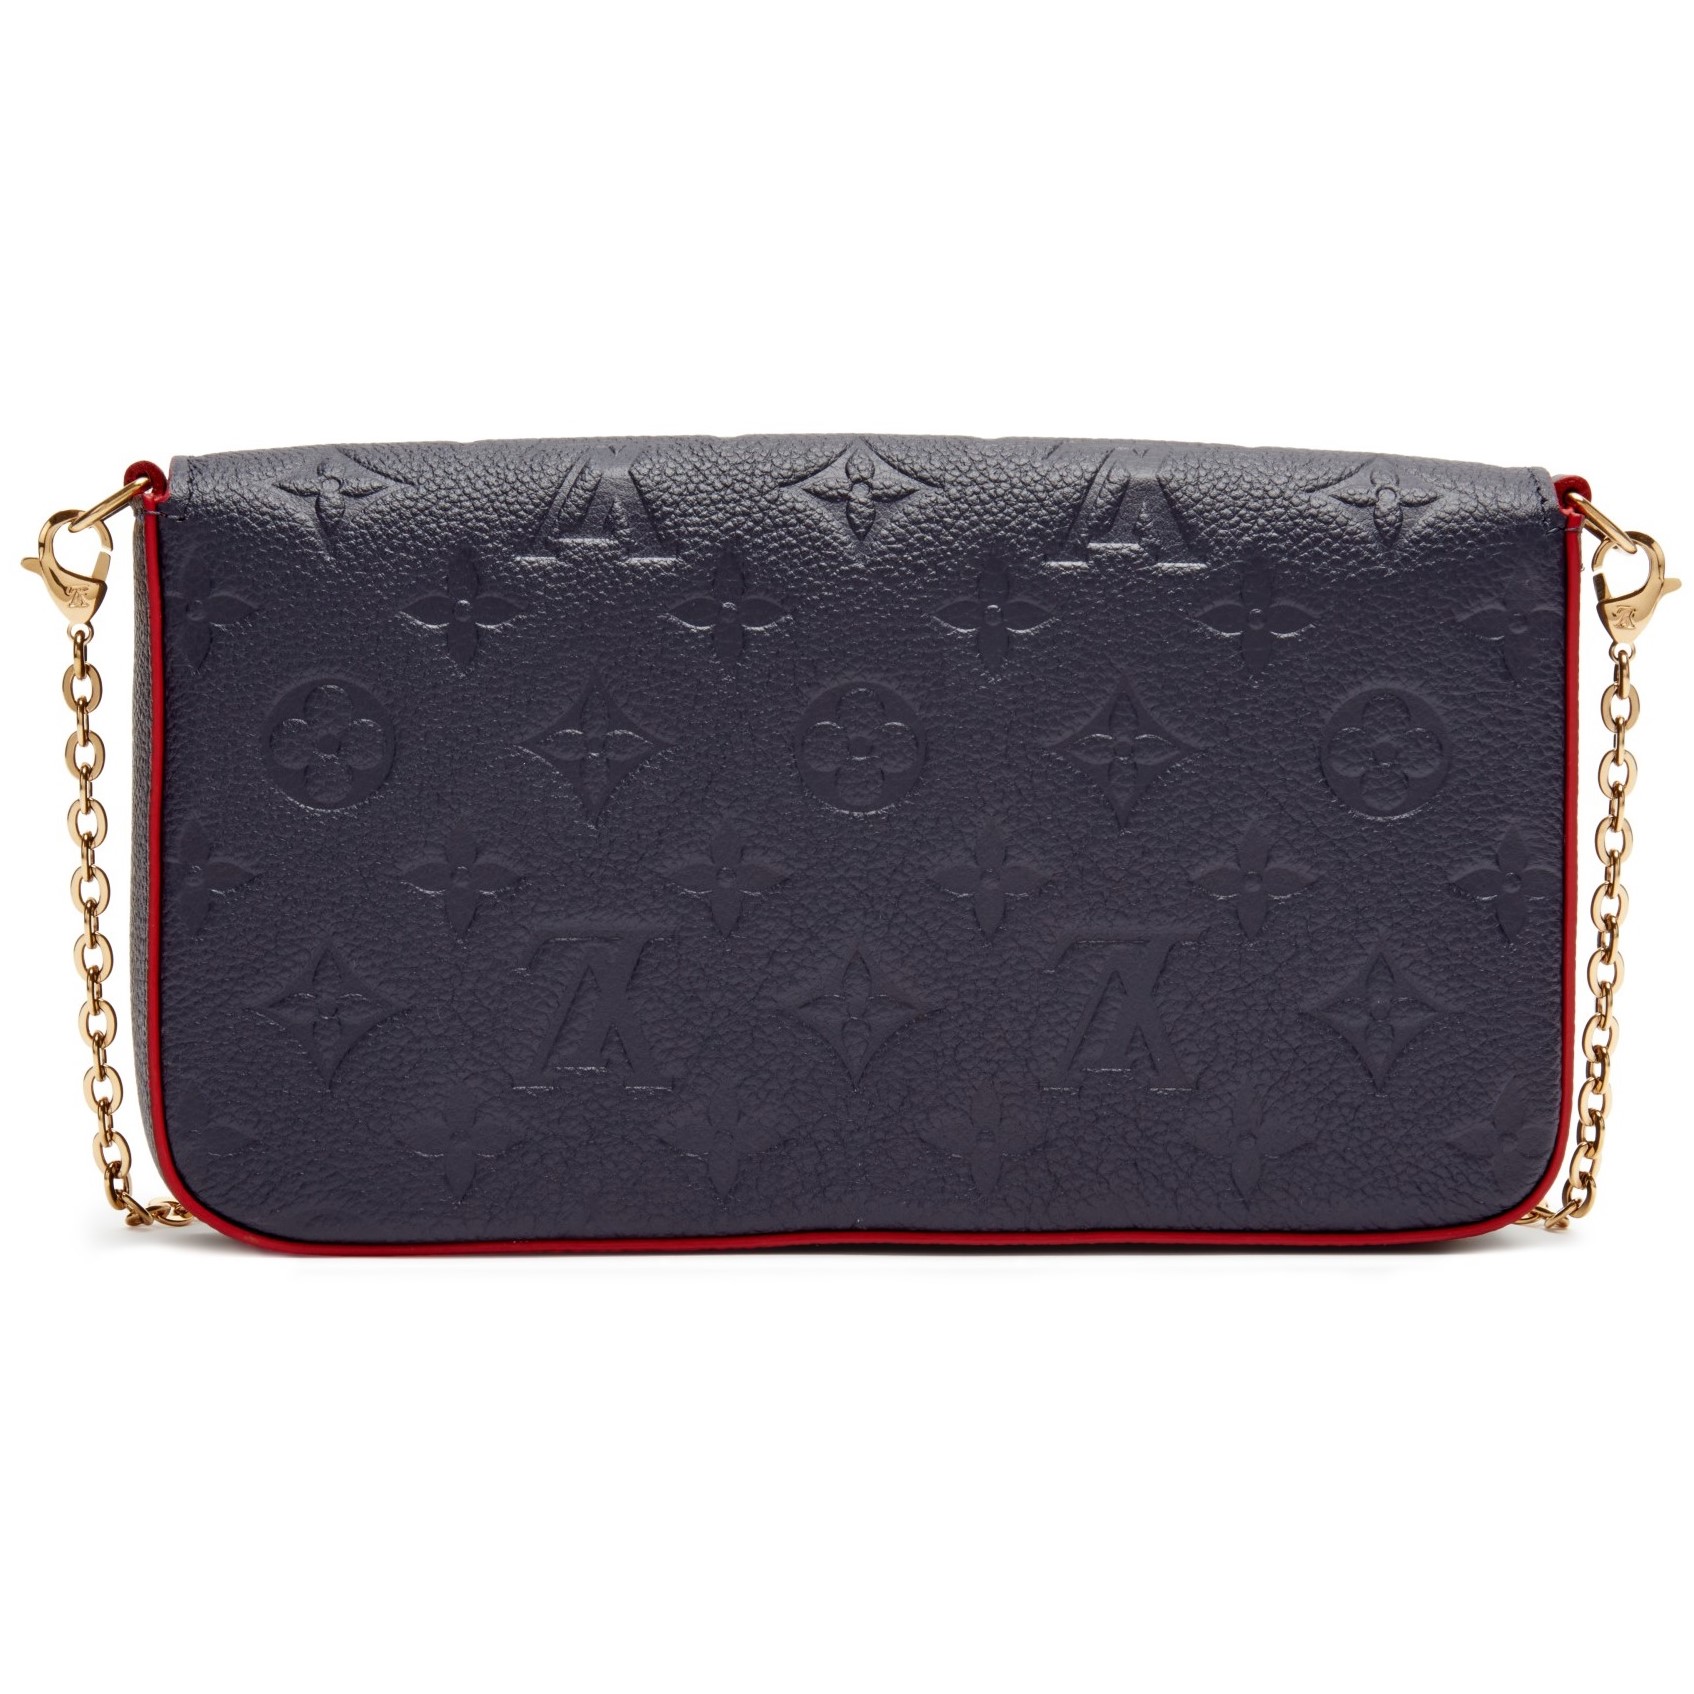 TÚI ĐEO CHÉO NỮ LV LOUIS VUITTON FÉLICIE POCHETTE MARINE ROUGE MONOGRAM EMPREINTE LEATHER WALLETS AND SMALL LEATHER GOODS M64099 8